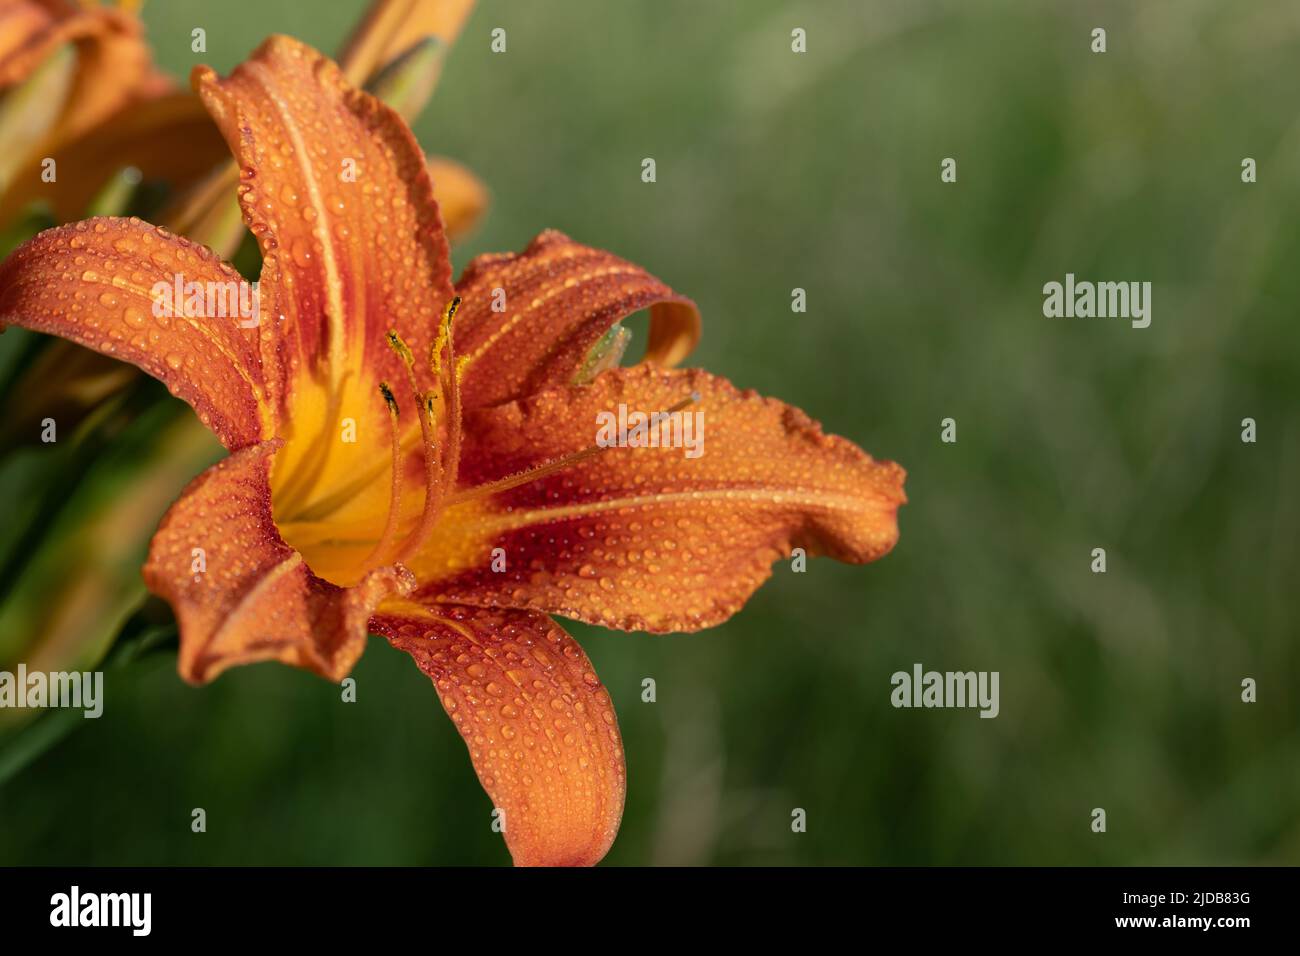 Close-up of the orange flower of a daylily (Hemerocallis), against a green background in nature. Stock Photo